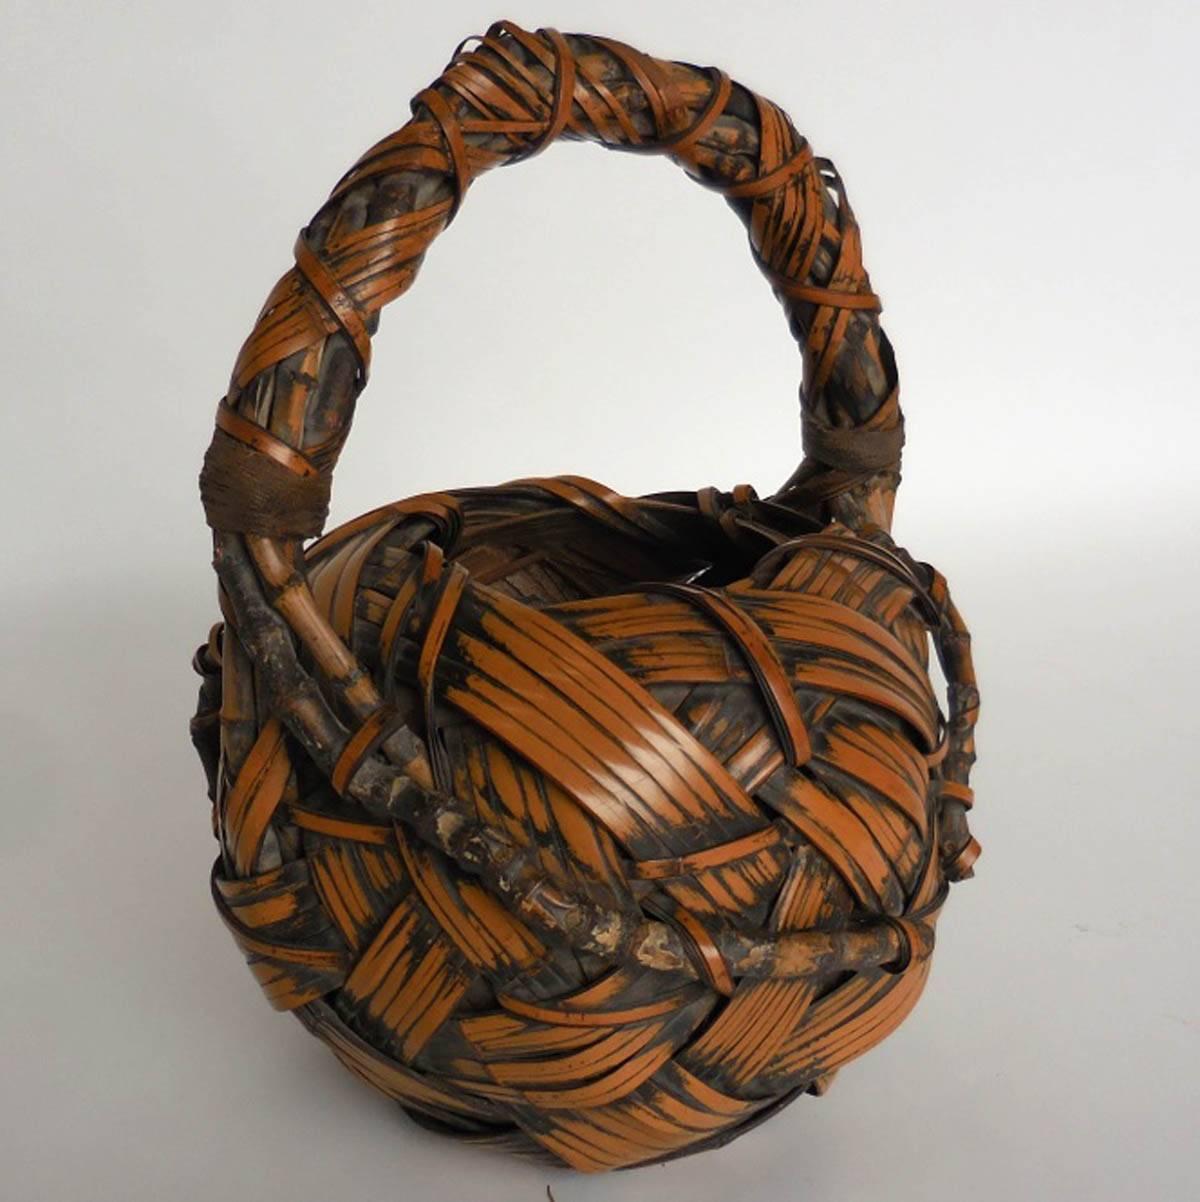 Rustic 19th century woven light color bamboo and root basket (kago) for floral arrangements (ikebana), urushi lacquer. In excellent condition considering its age. 
Sturdy and functional. Beautiful sculptural object on its own. Textural.